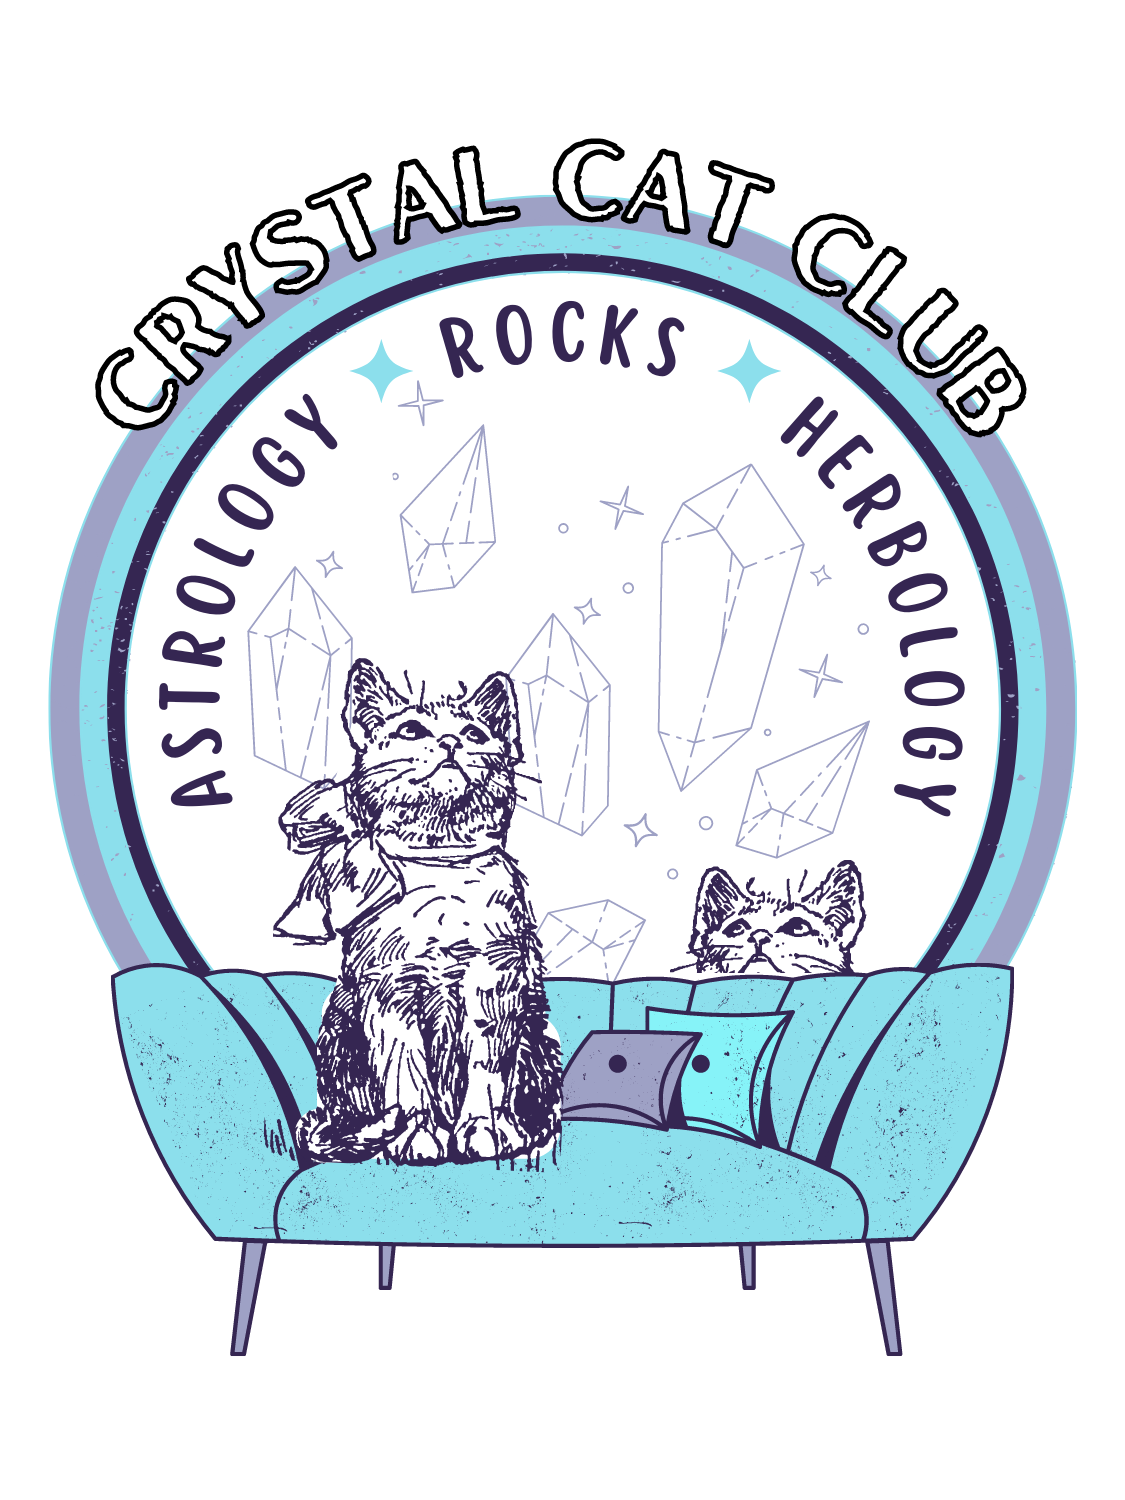 Crystal cats on a couch